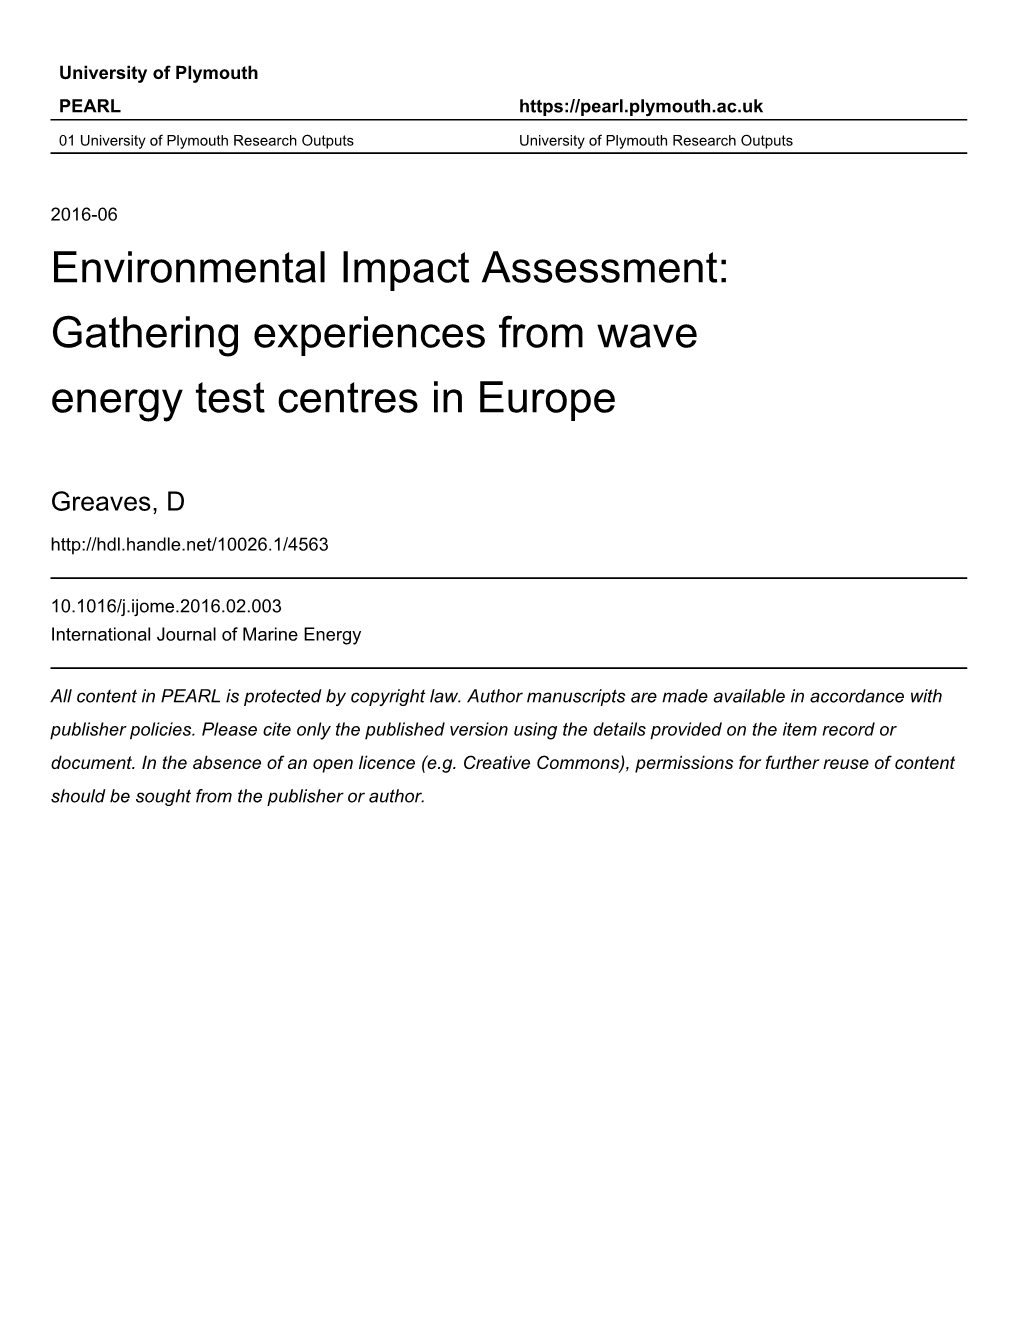 Gathering Experiences from Wave Energy Test Centres in Europe